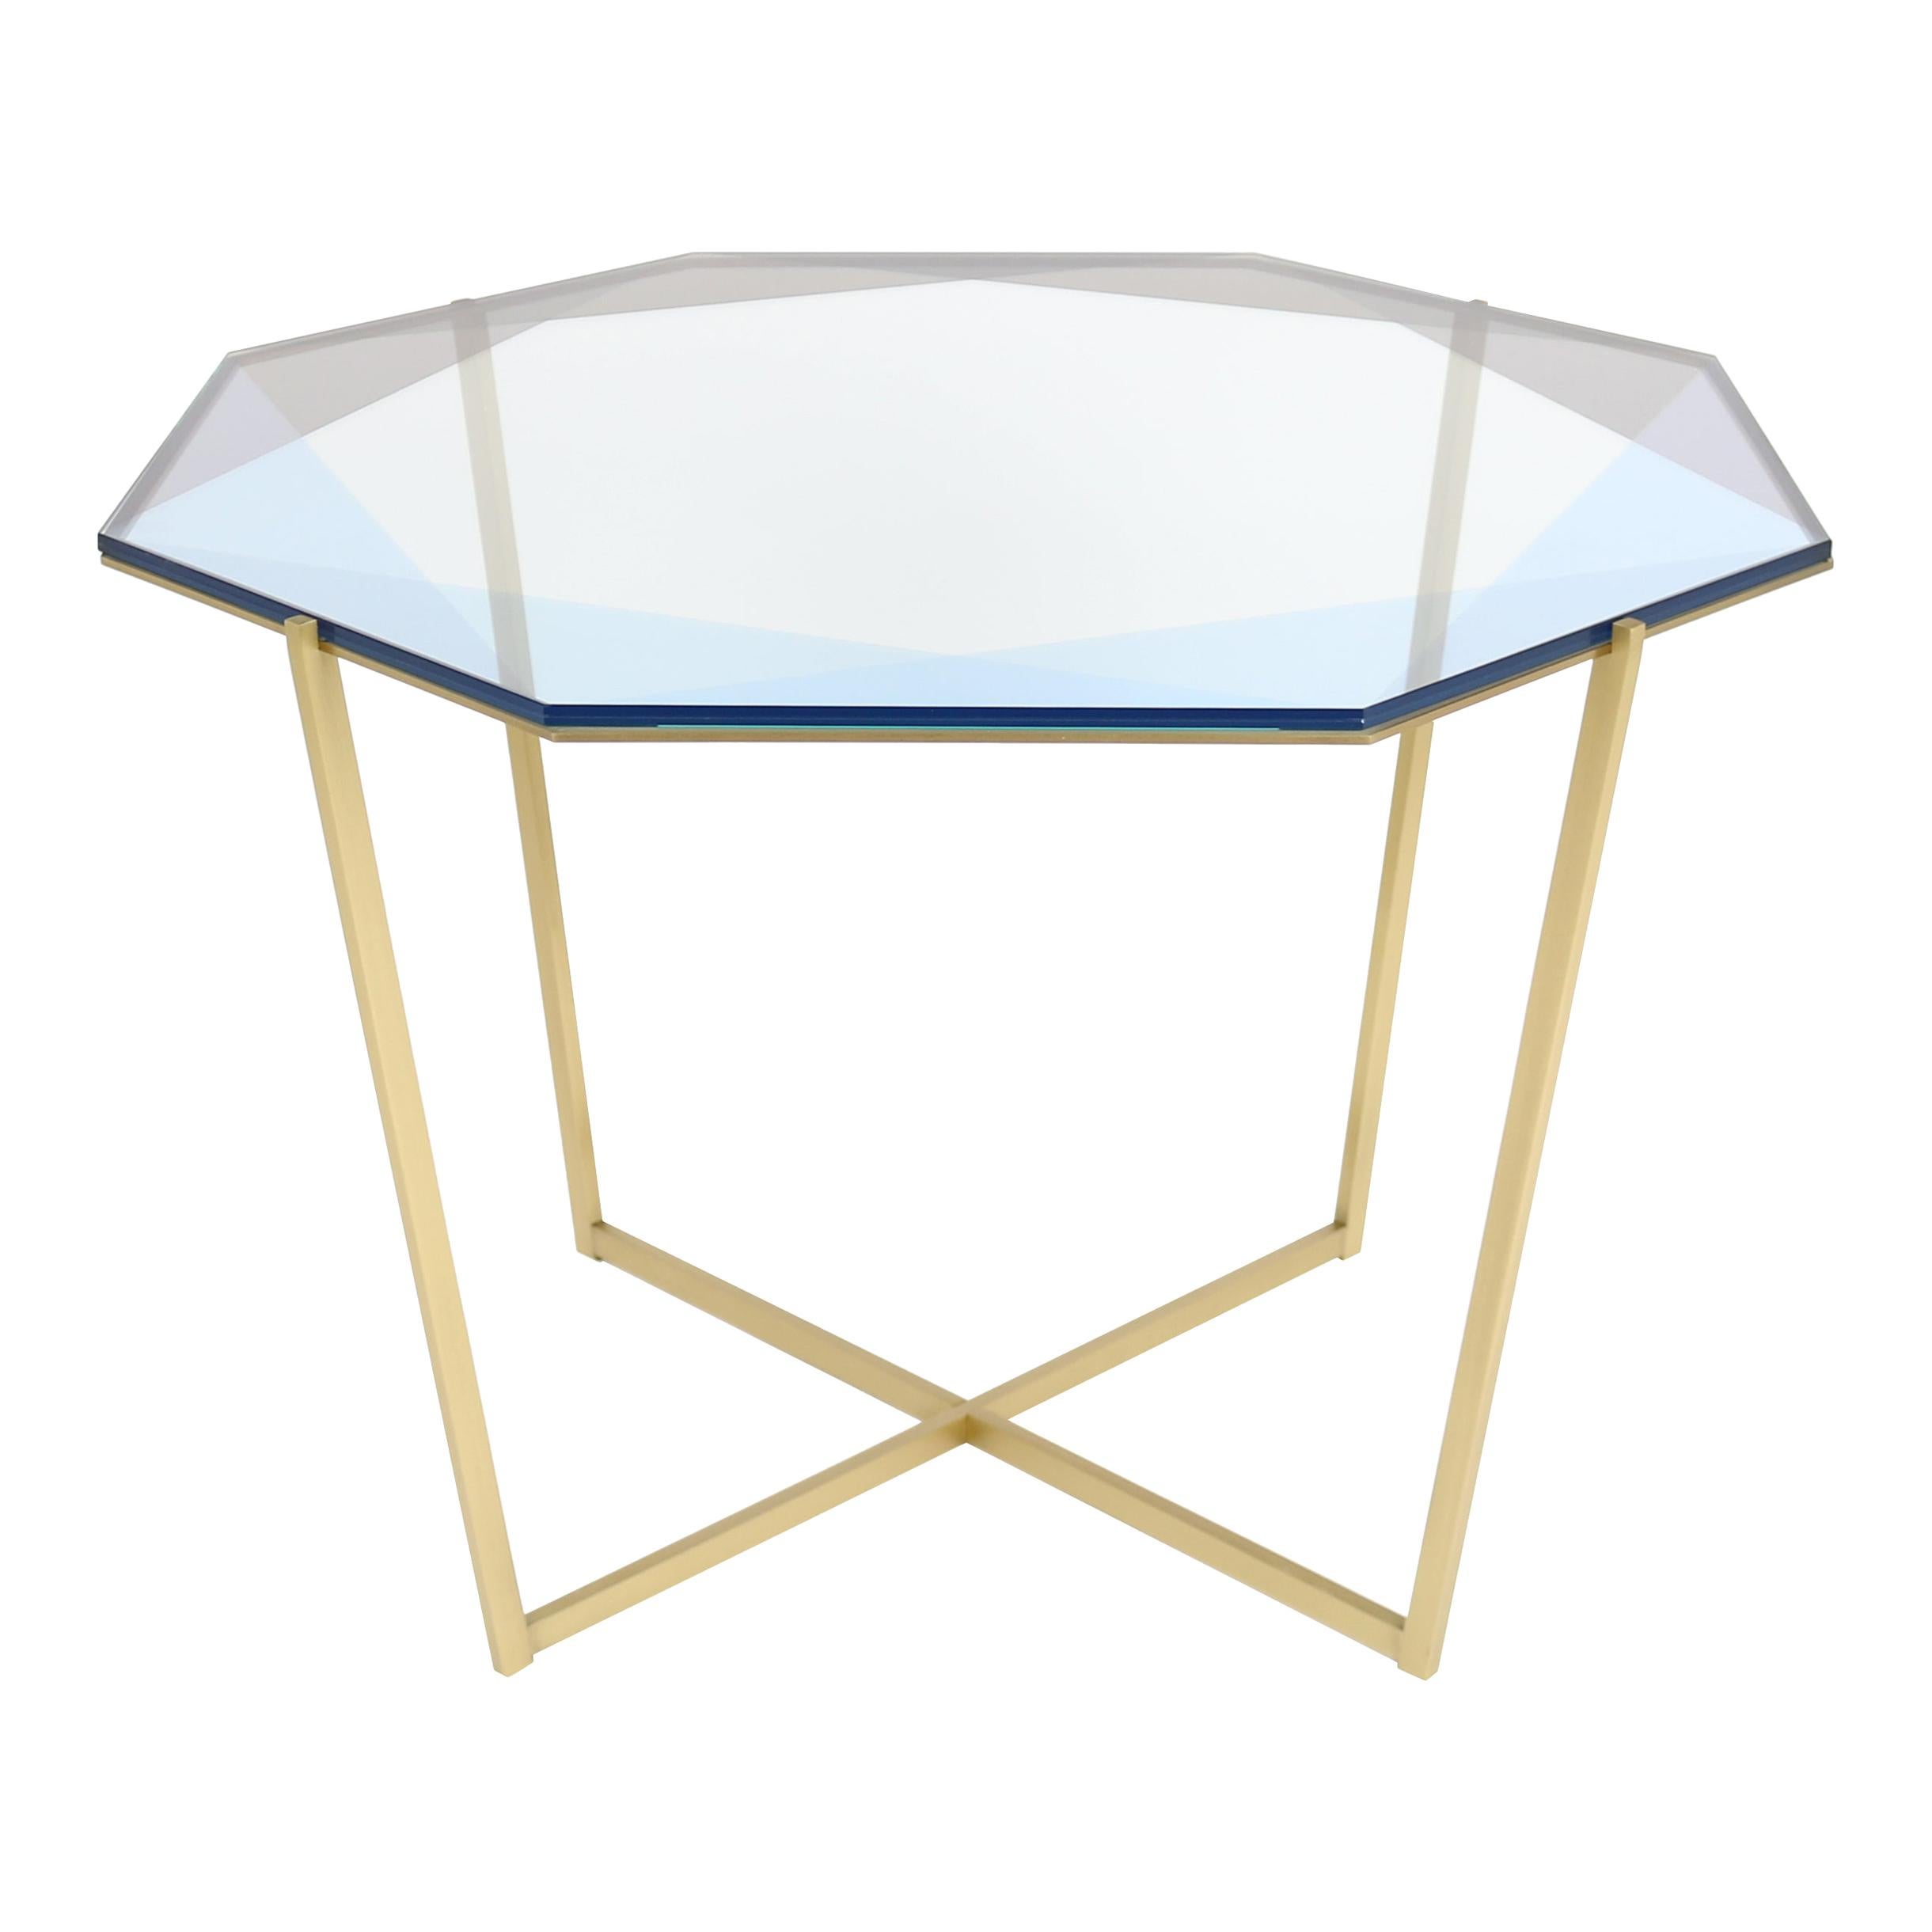 Gem Octagonal Dining Table/Entry Table-Blue Glass W/ Brass Base by Debra Folz For Sale